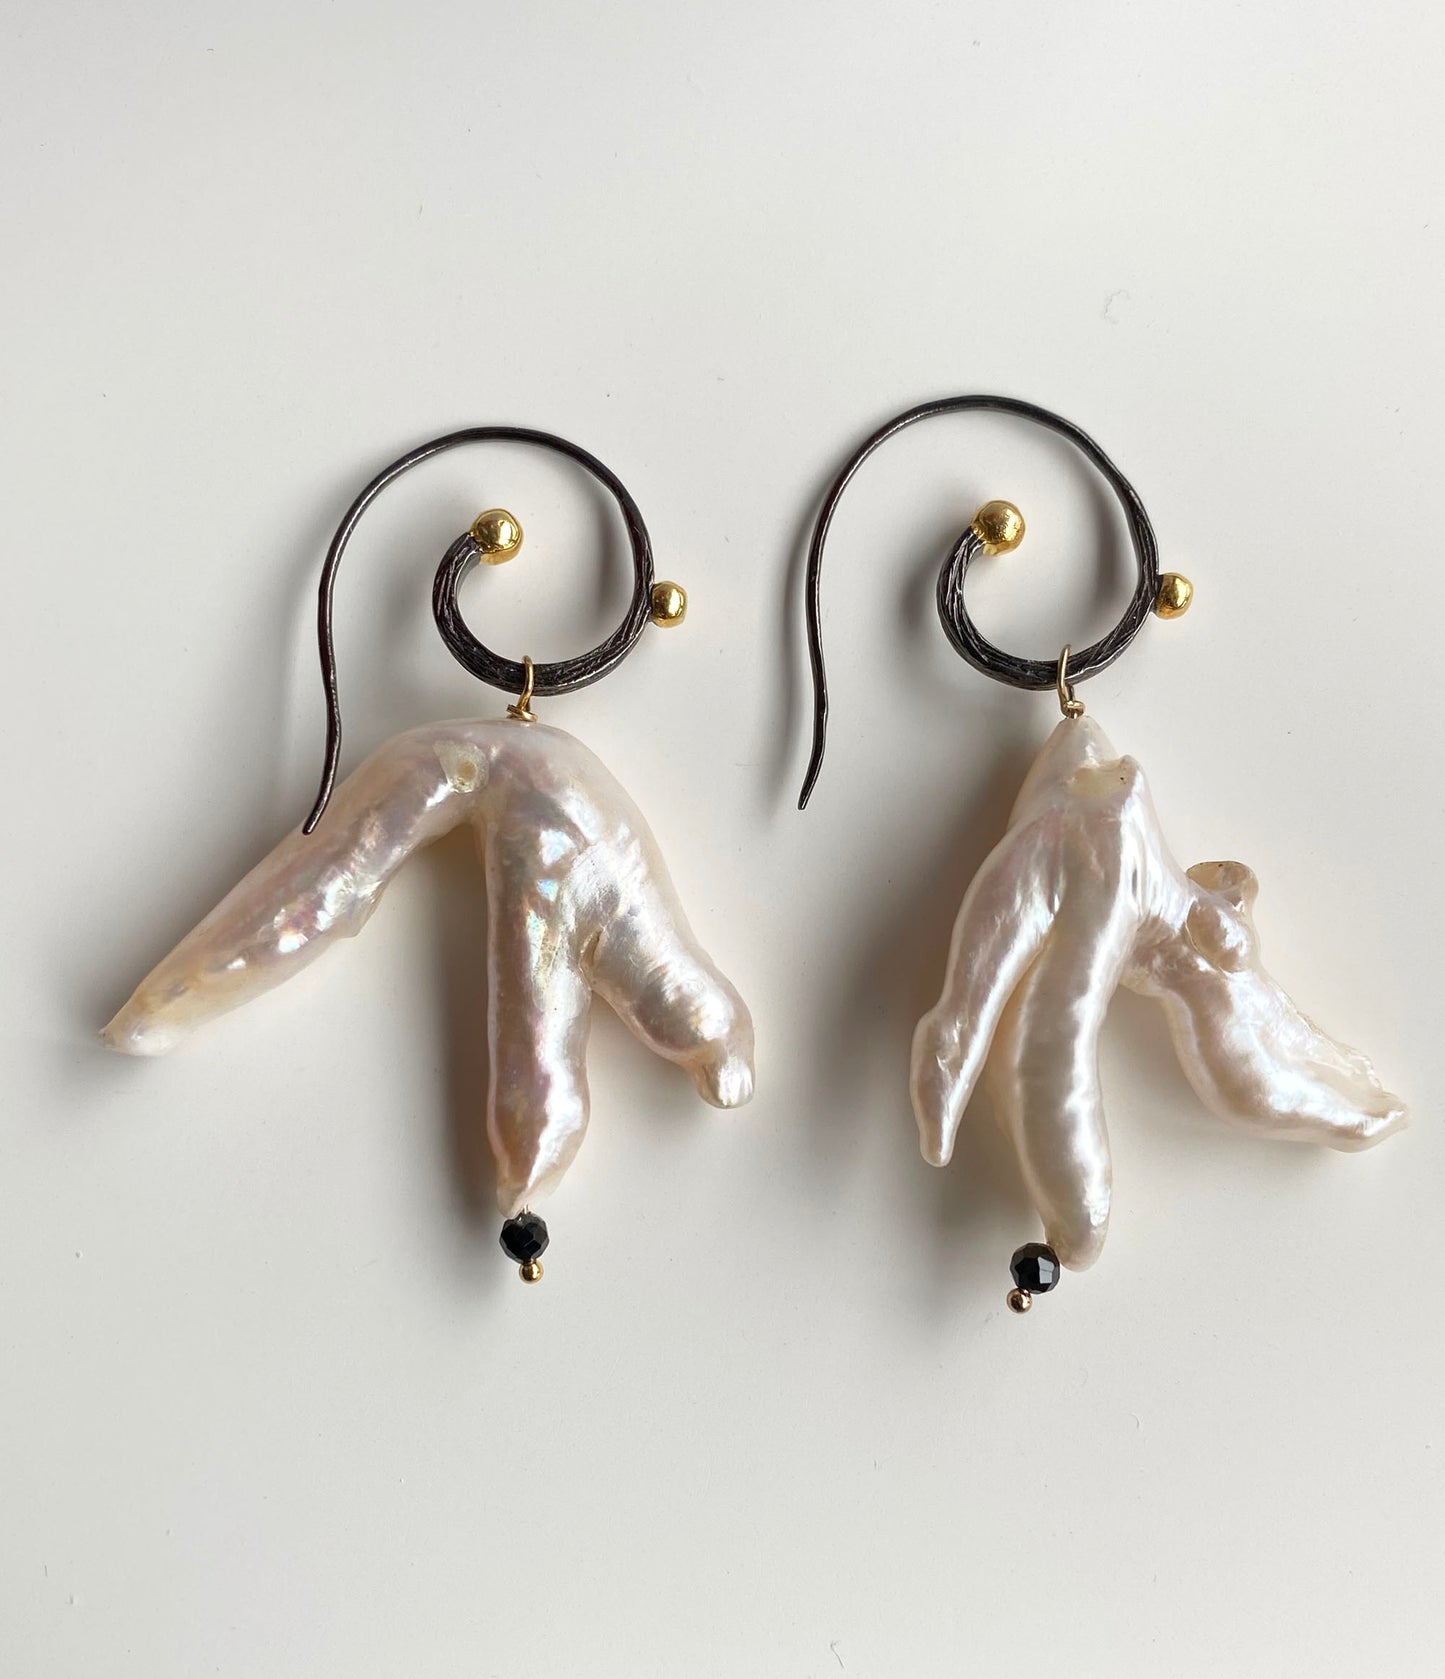 Large White Baroque Branch Pearl Earrings on Black Anodized Sterling Silver and 14K Gold Filled Spiral Earwires